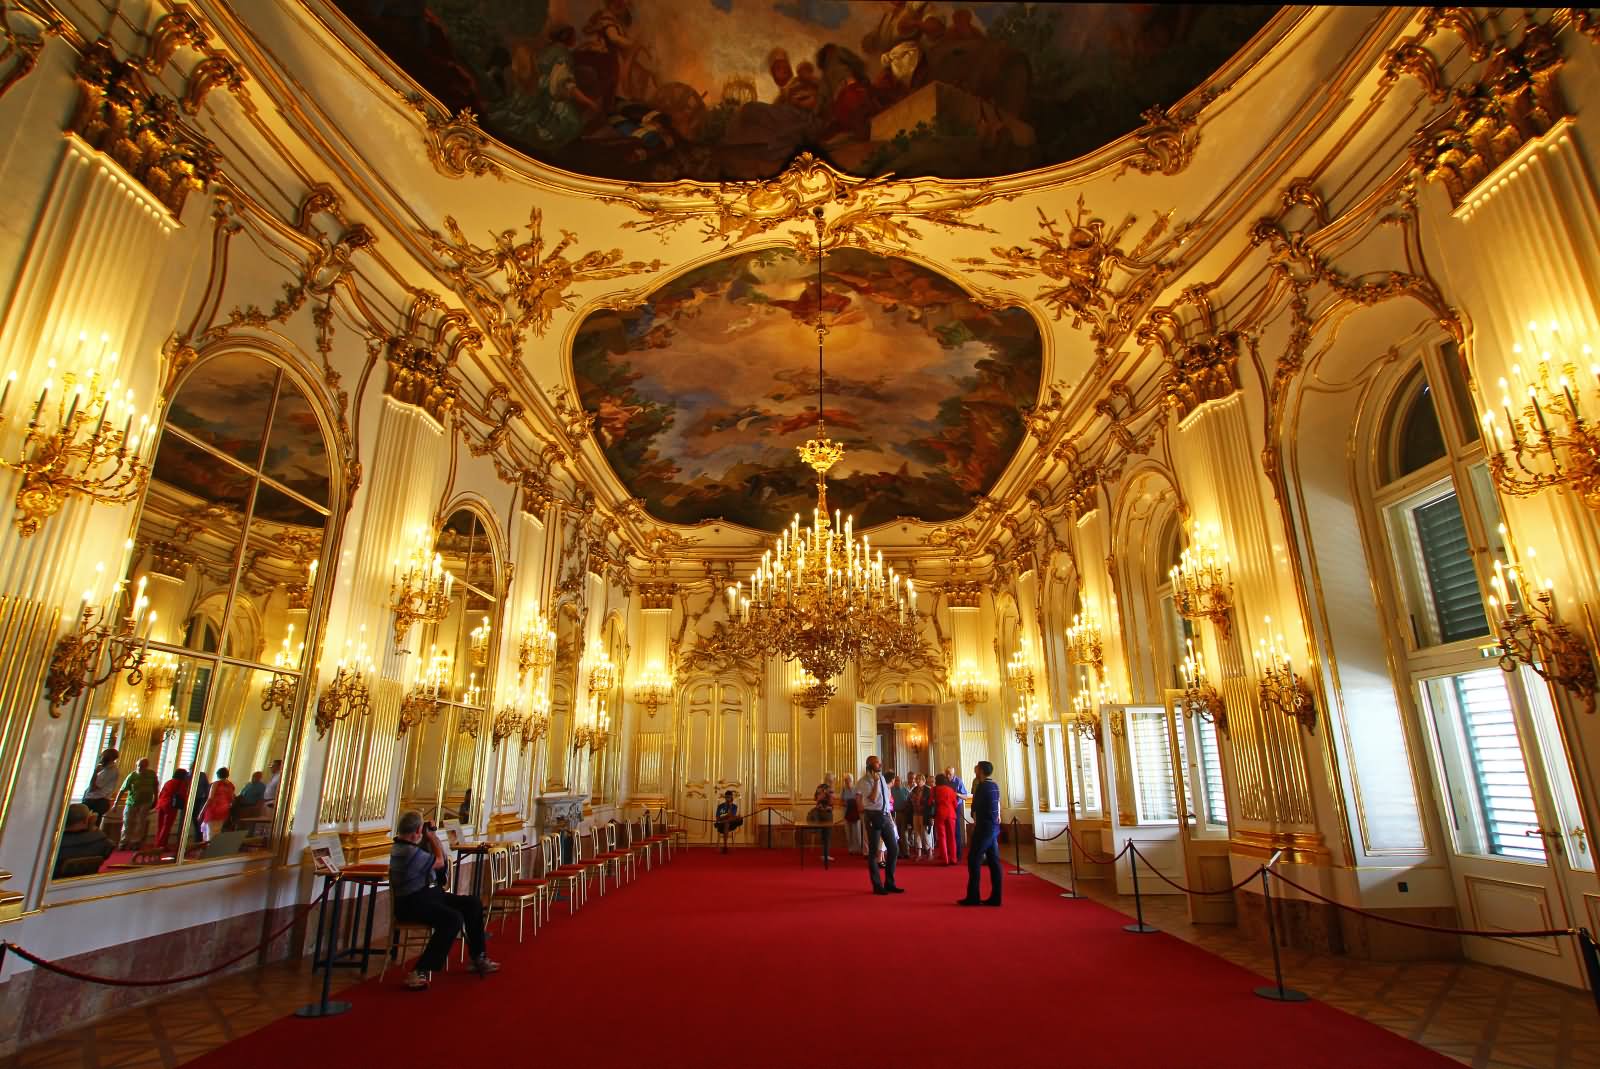 The Schonbrunn Palace Inside View Image in Vienna